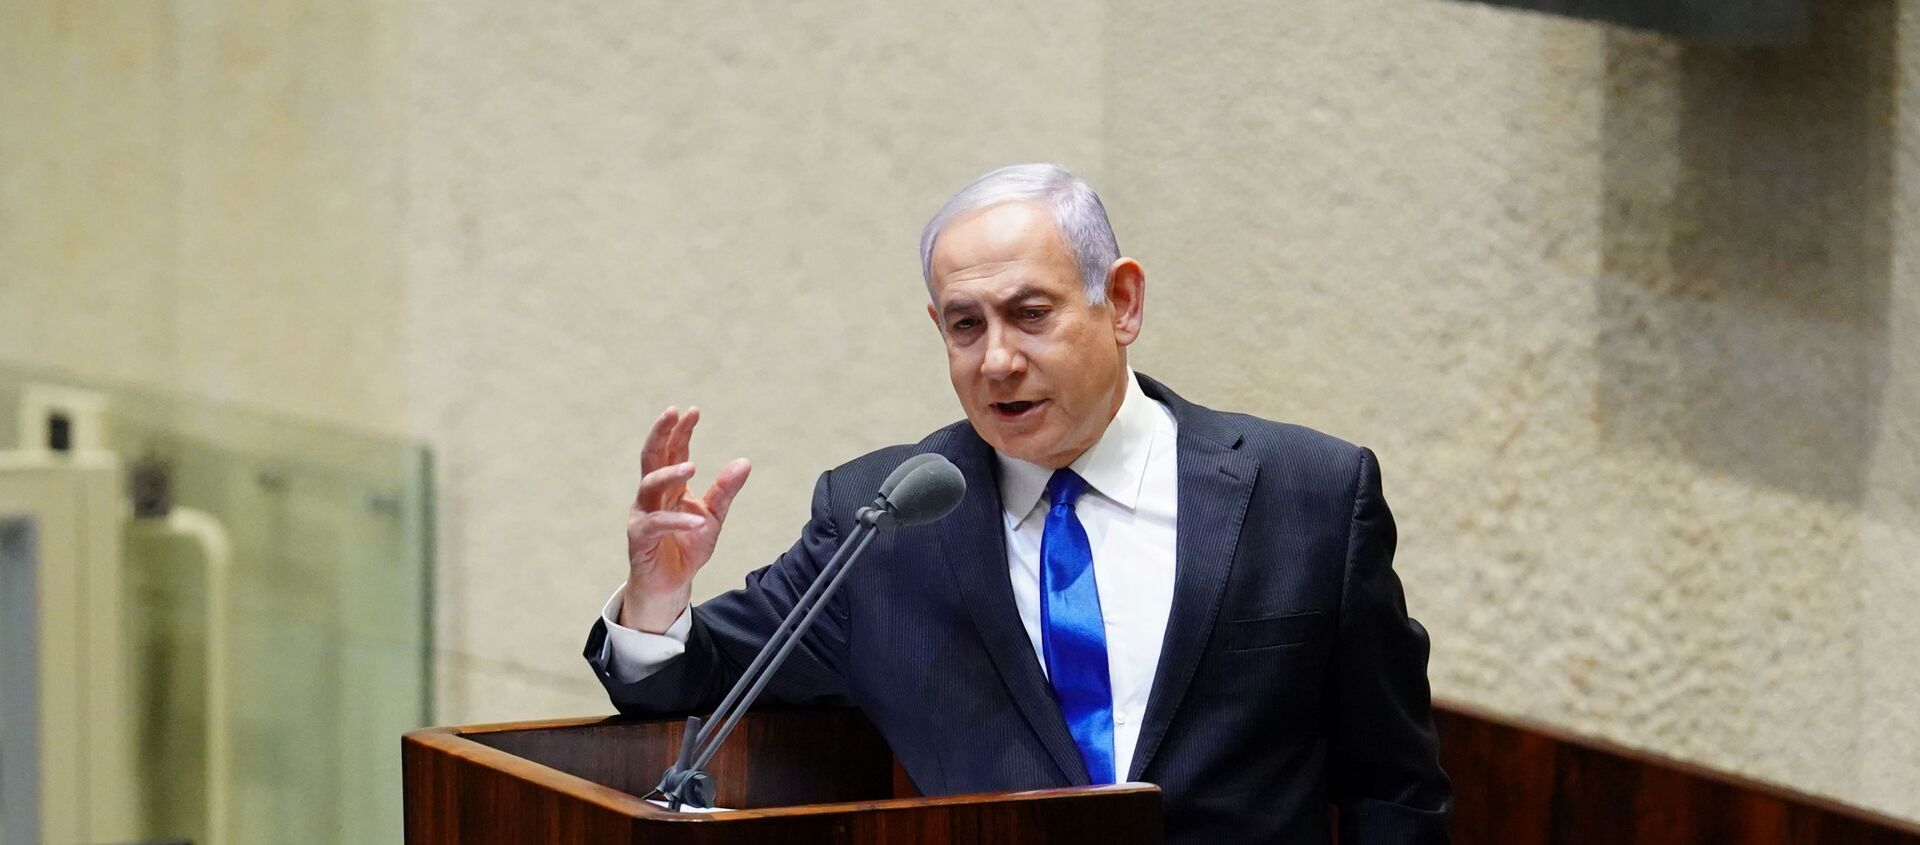 Israeli Prime Minister Benjamin Netanyahu speaks during a swearing in ceremony of his new unity government with election rival Benny Gantz, at the Knesset, Israel's parliament, in Jerusalem May 17, 2020 - Sputnik International, 1920, 24.05.2020